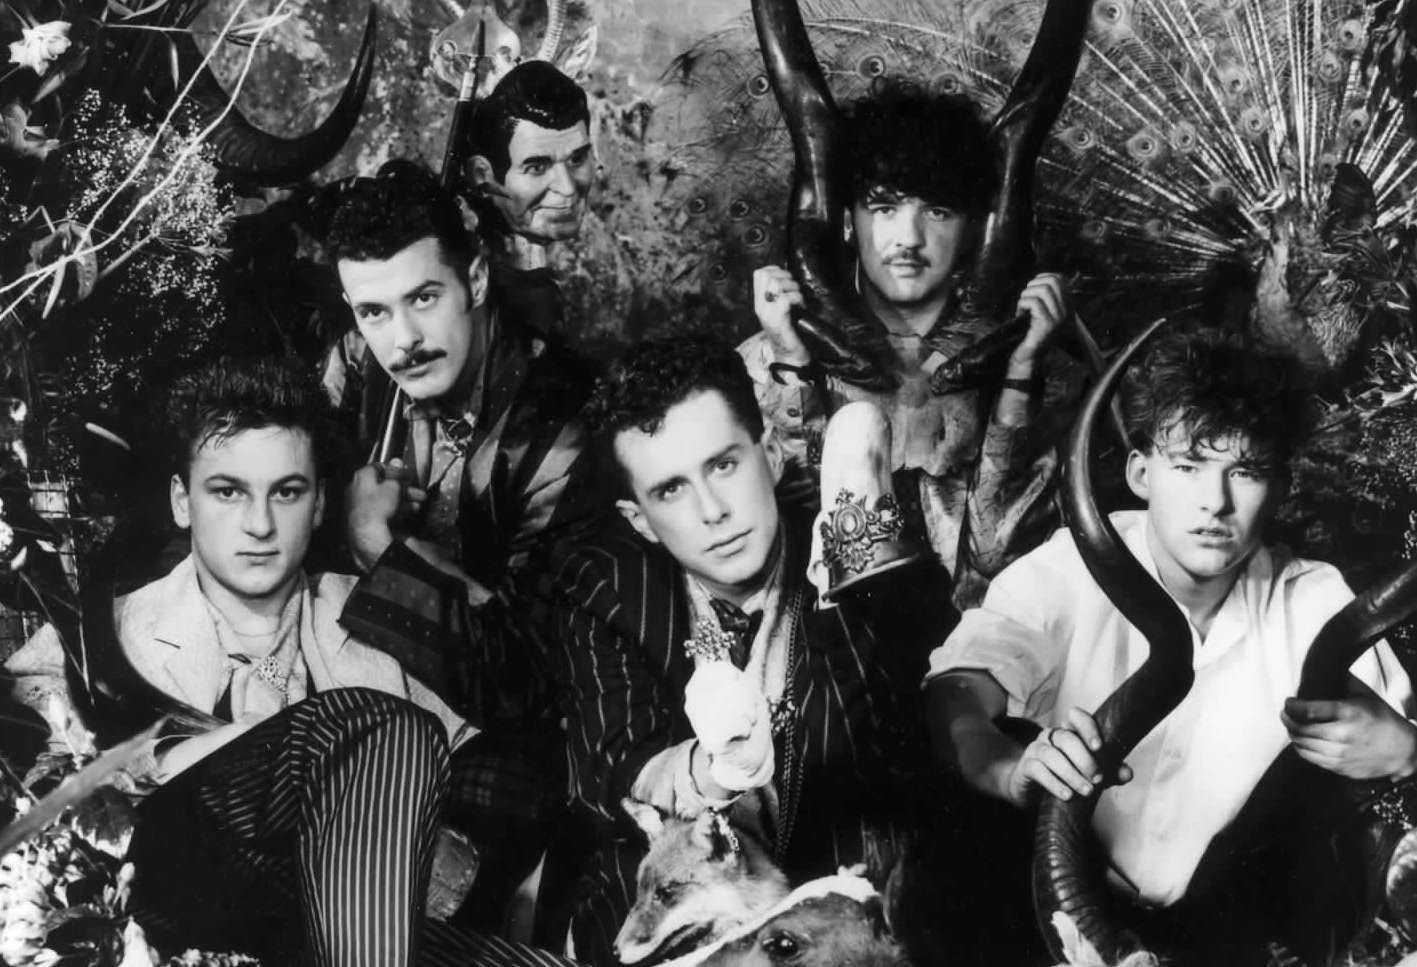 Frankie Goes to Hollywood were the biggest chart sensations of 1984